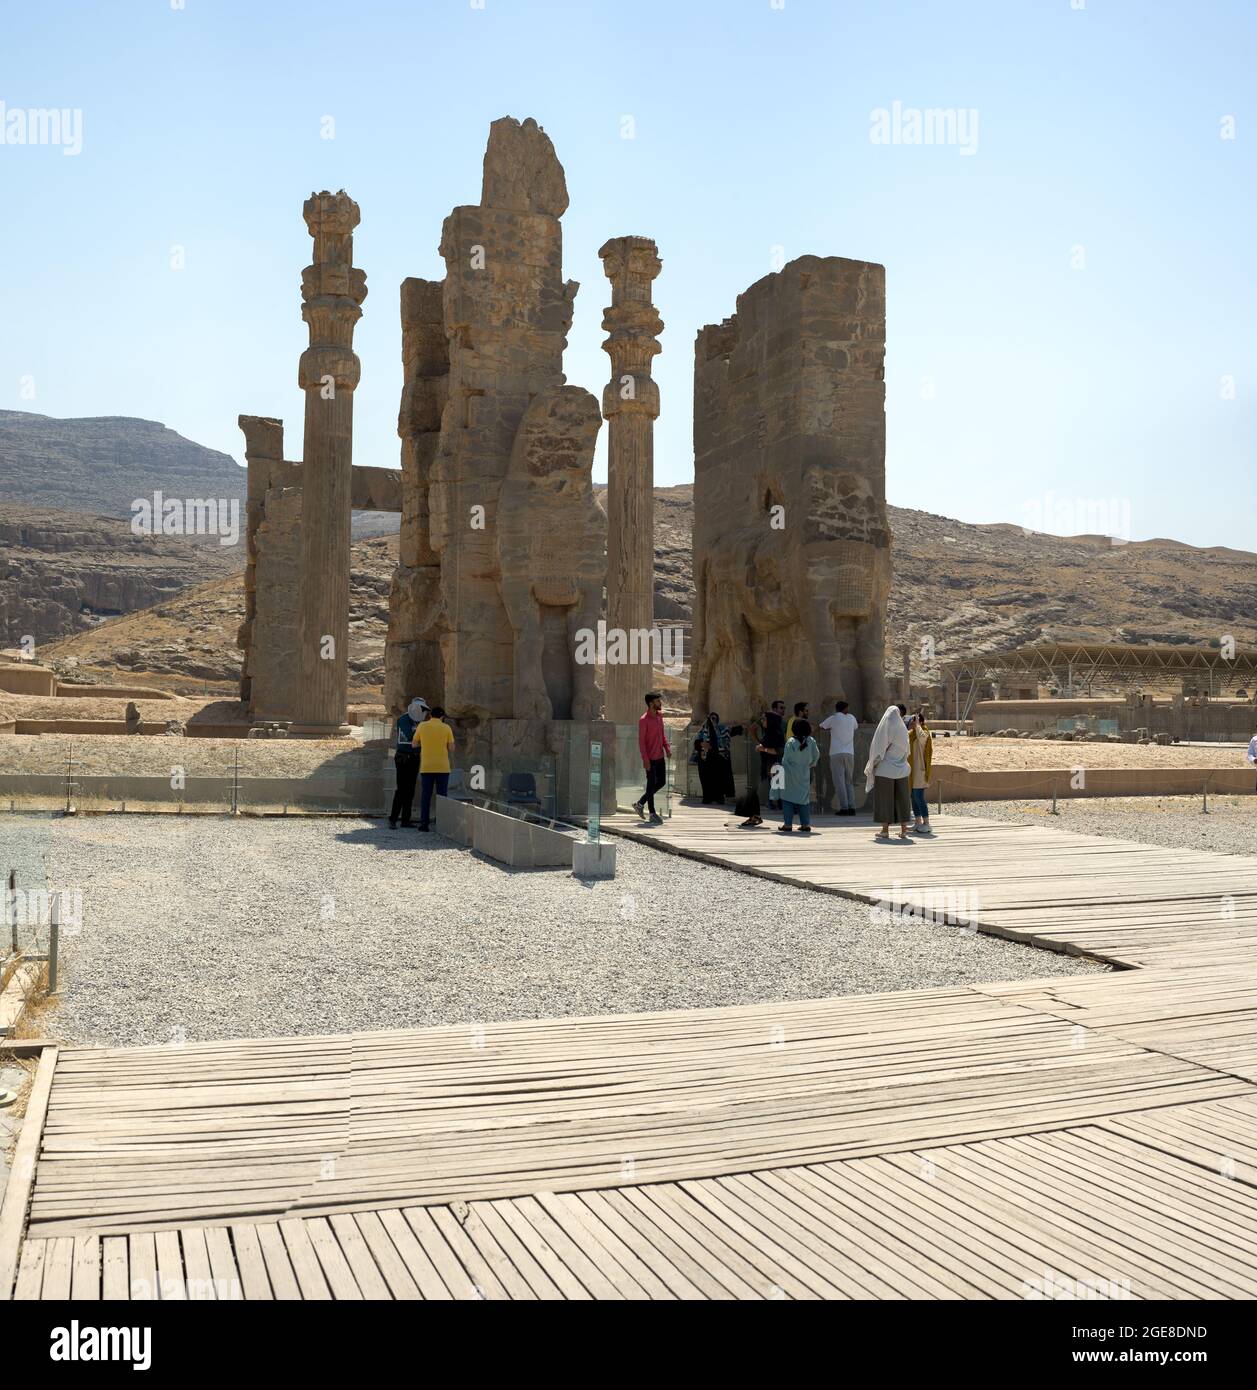 Shiraz, Iran, july 29, 2021: Gate of All Nations (Xerxes Gate) with stone statues of bulls in ancient city Persepolis, Iran. UNESCO world heritage sit Stock Photo